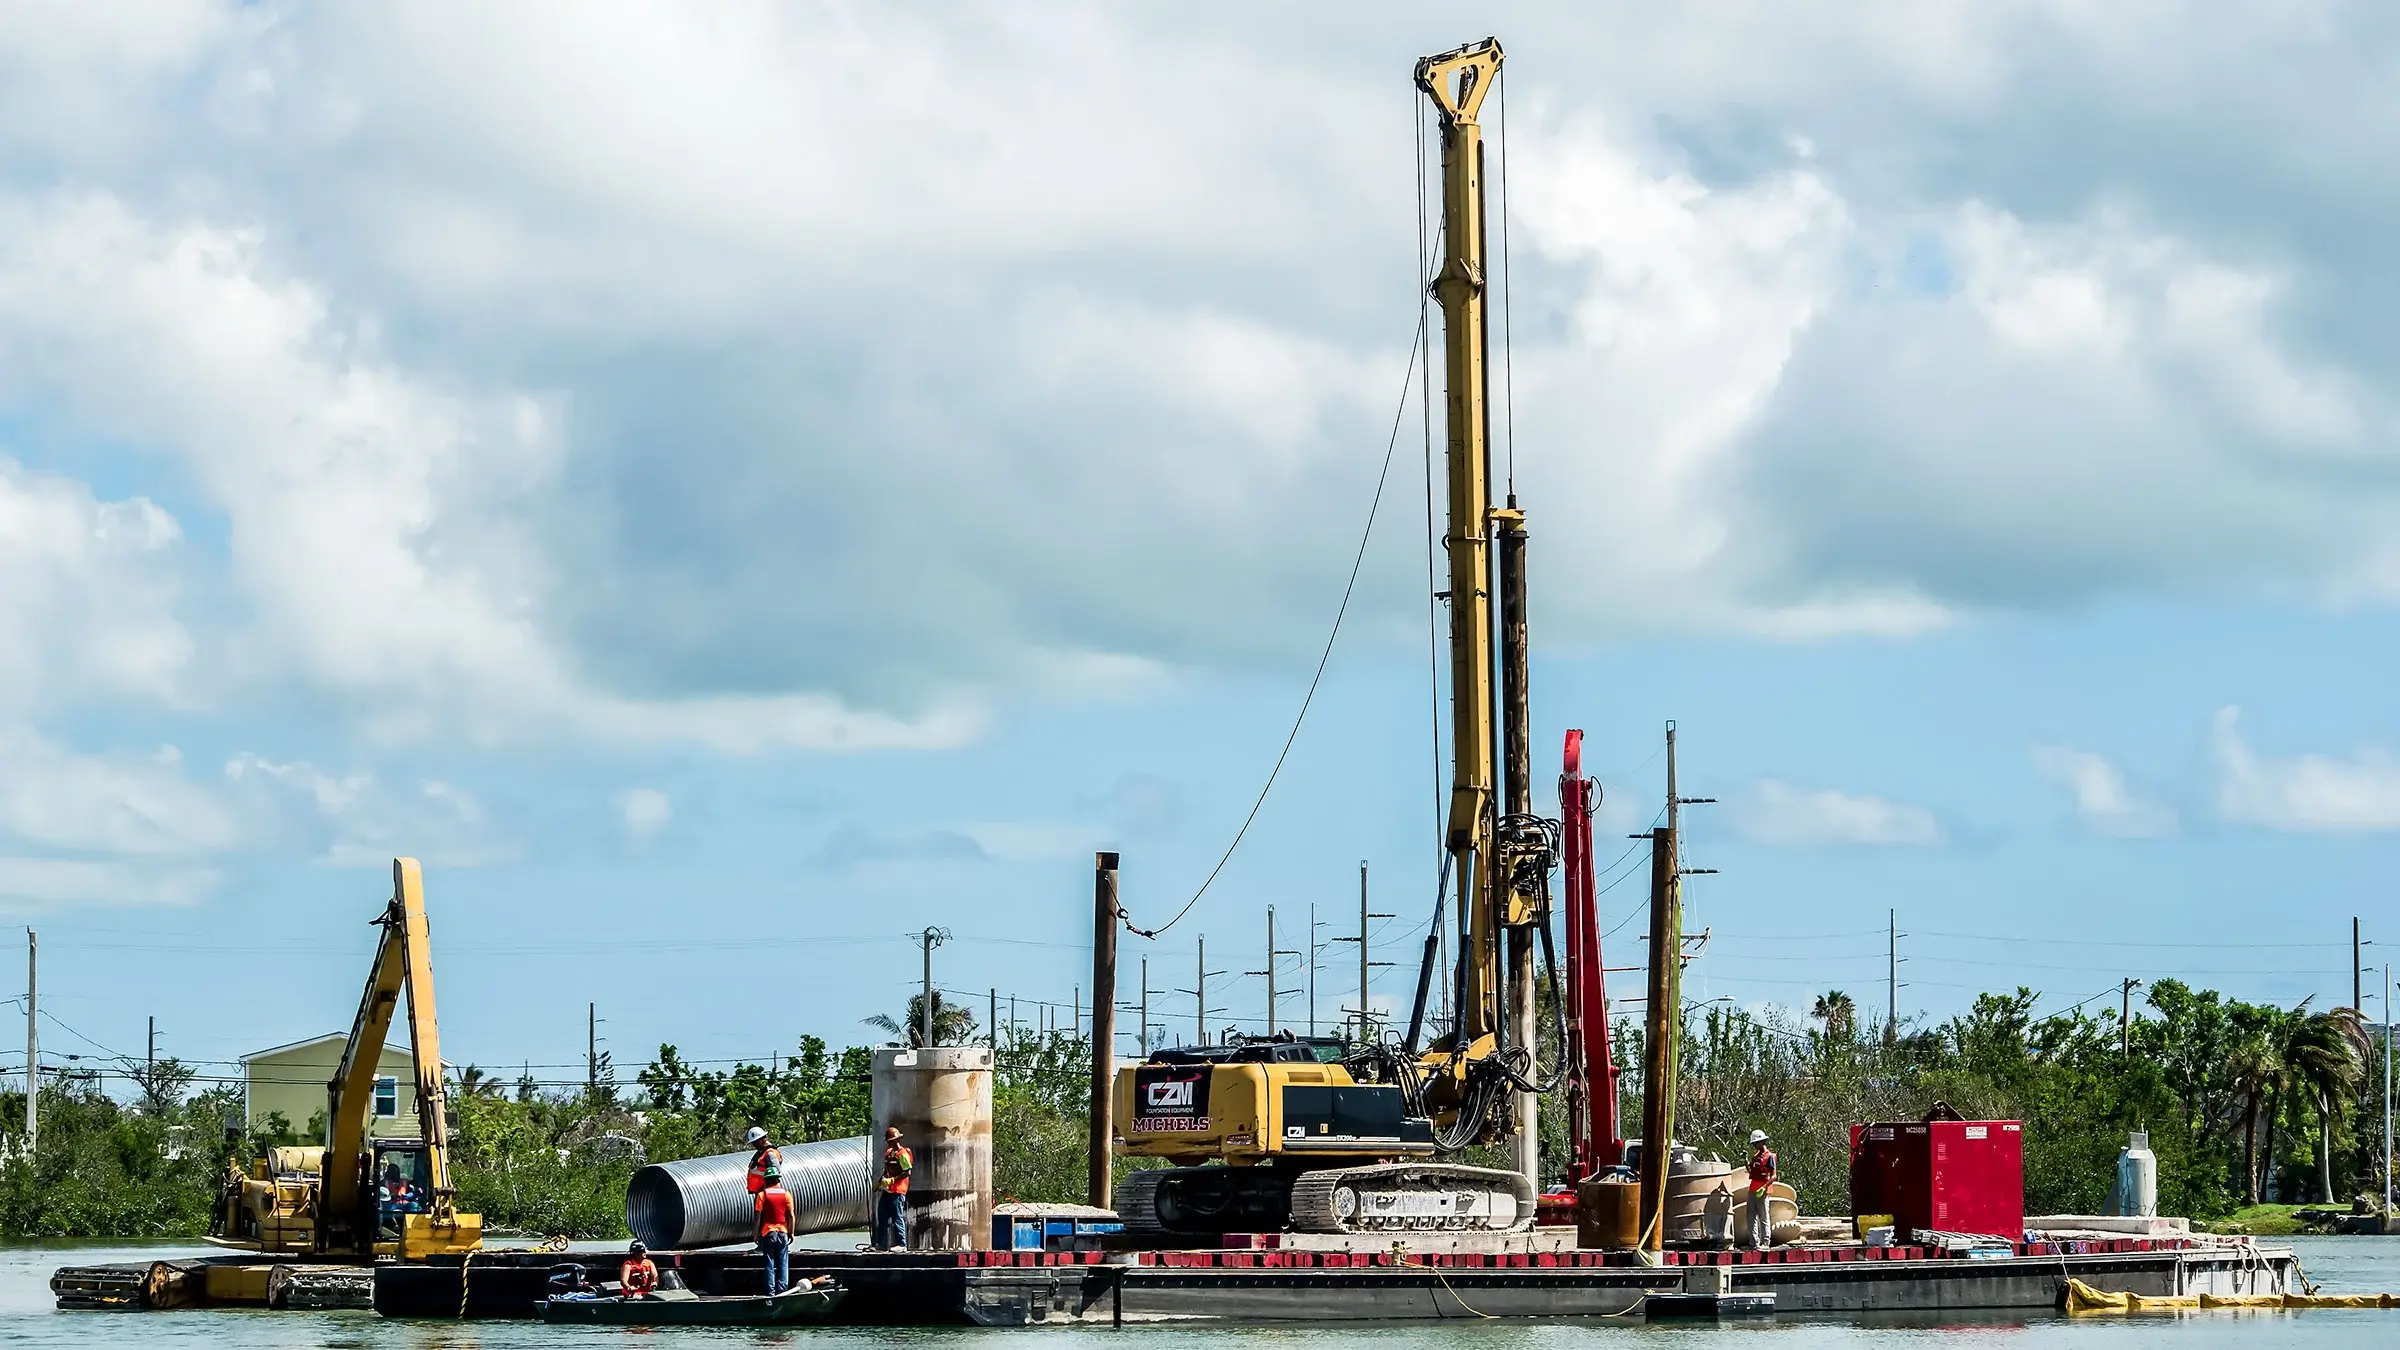 A large drill rig operates on a water barge.